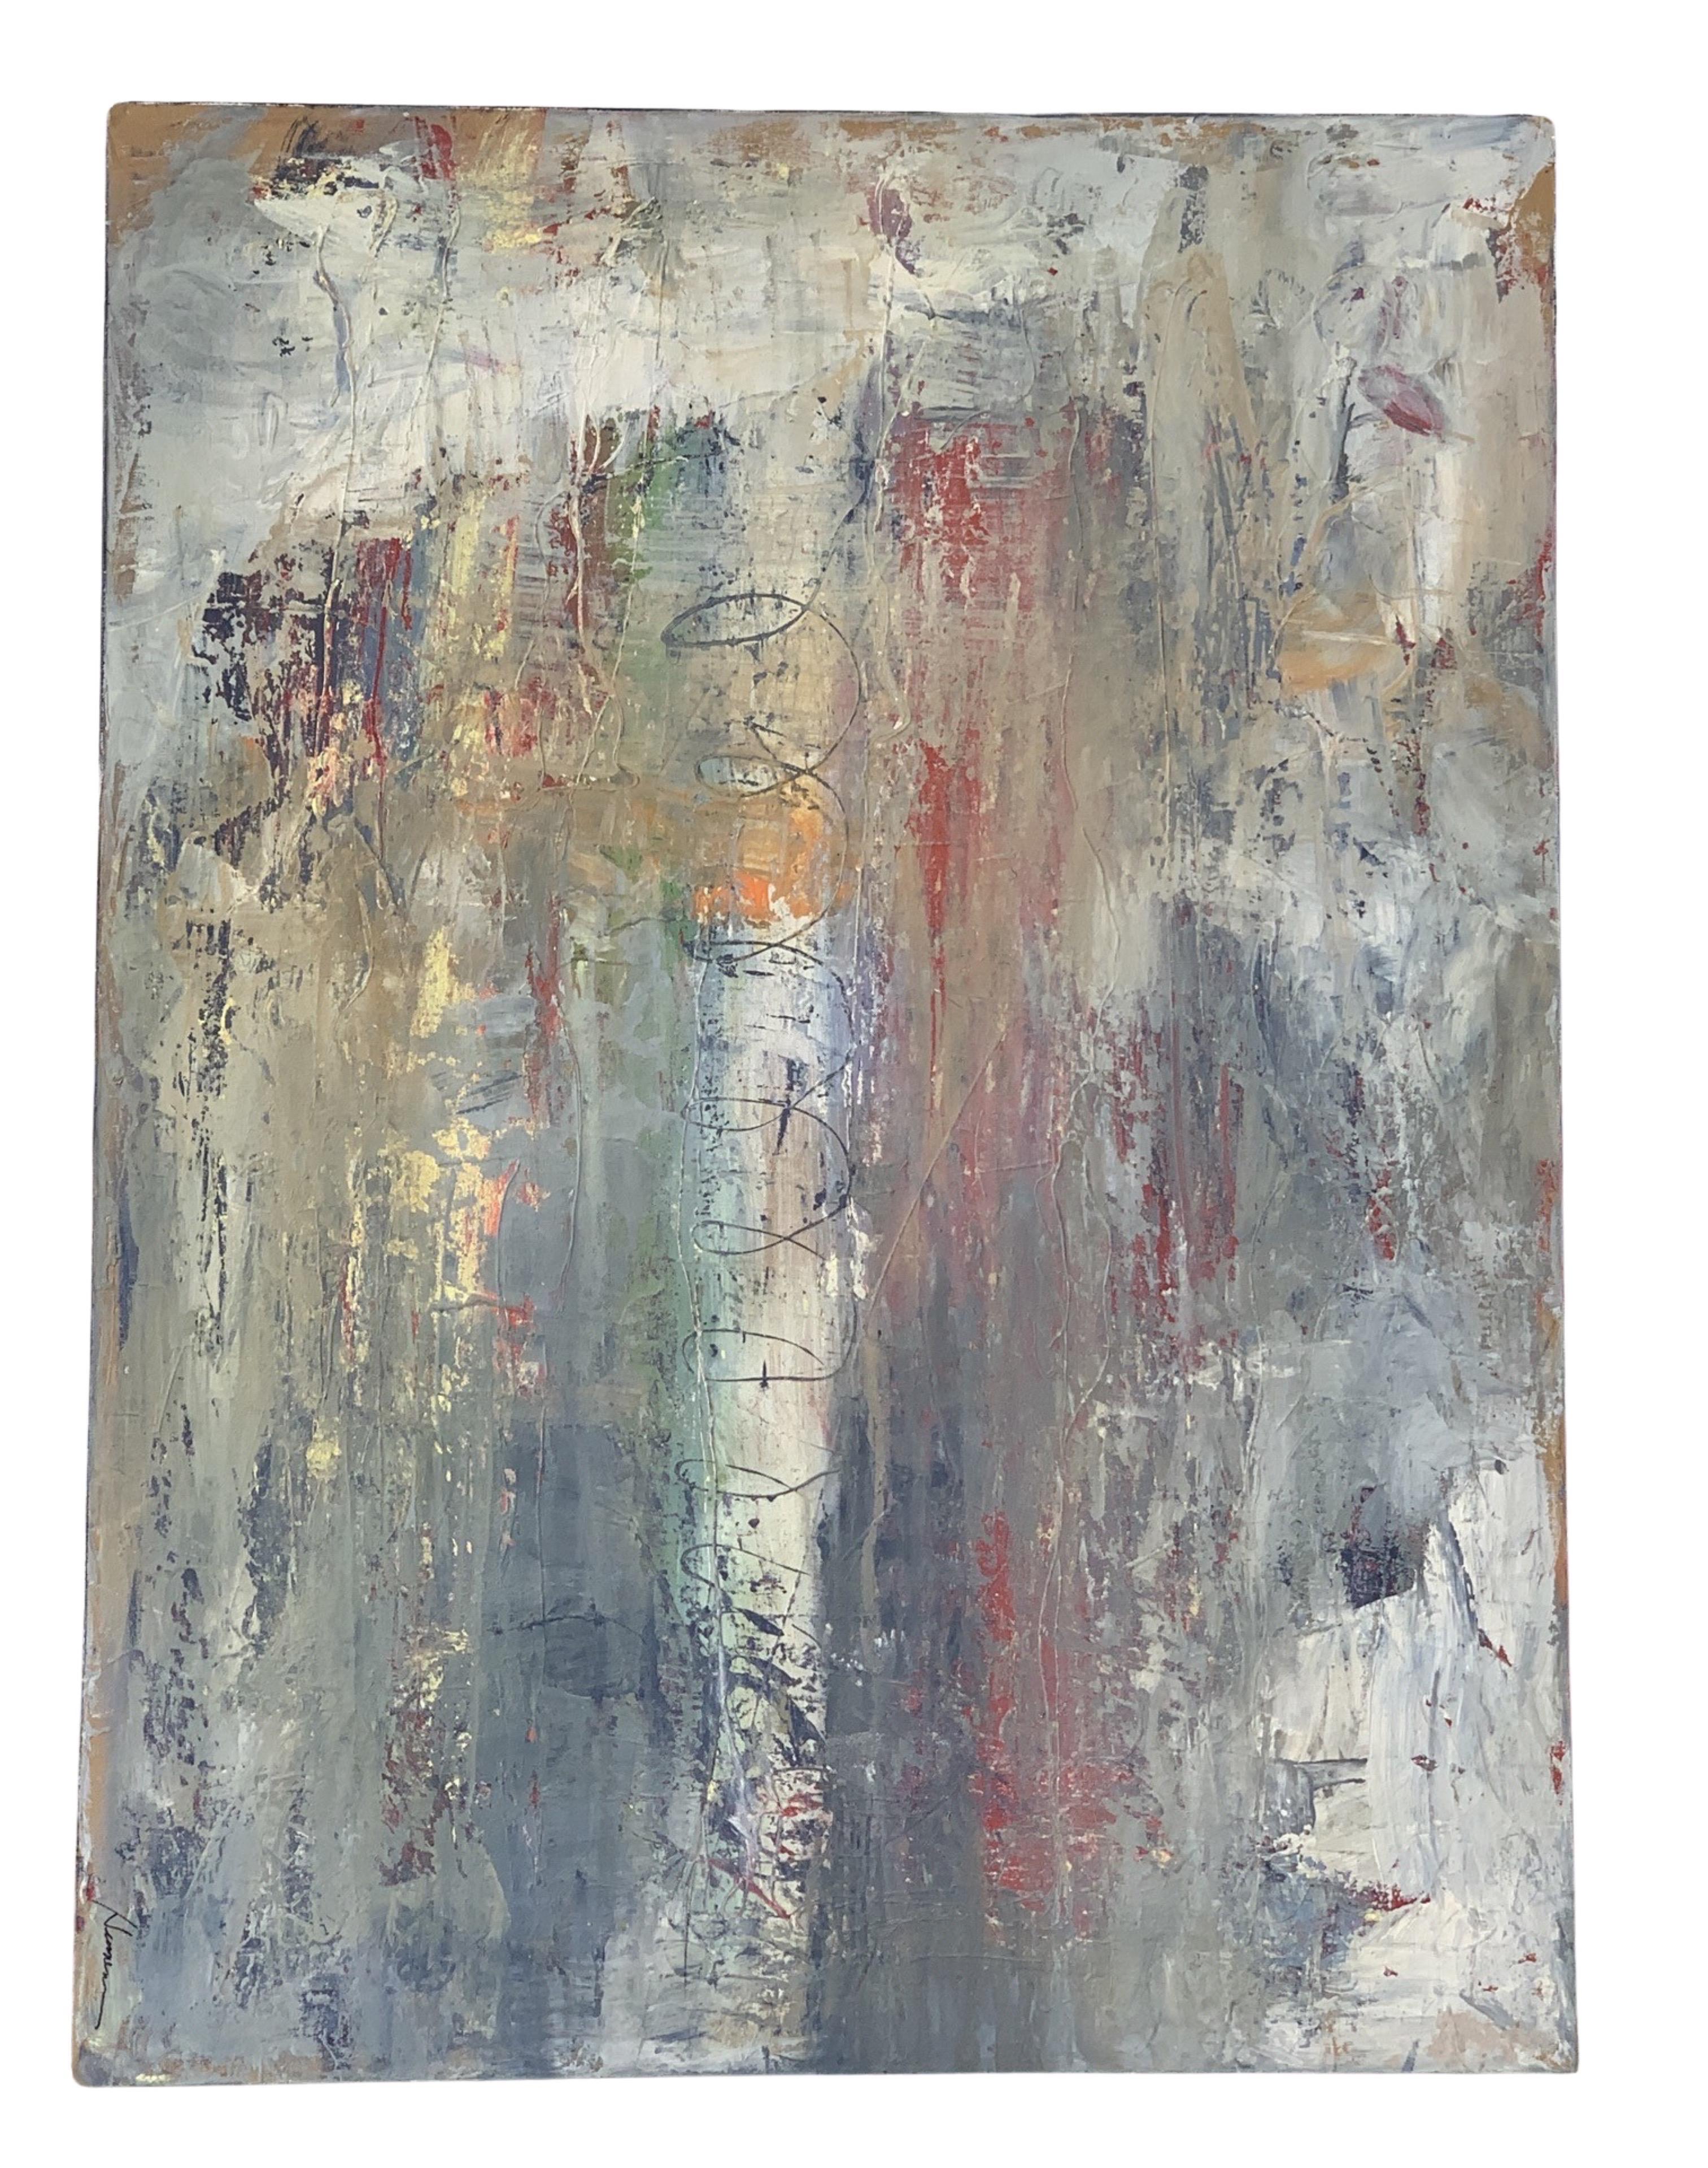 Hand-Painted Kathryn Henneman Original Abstract Painting with Neutral Color & Brights.  For Sale